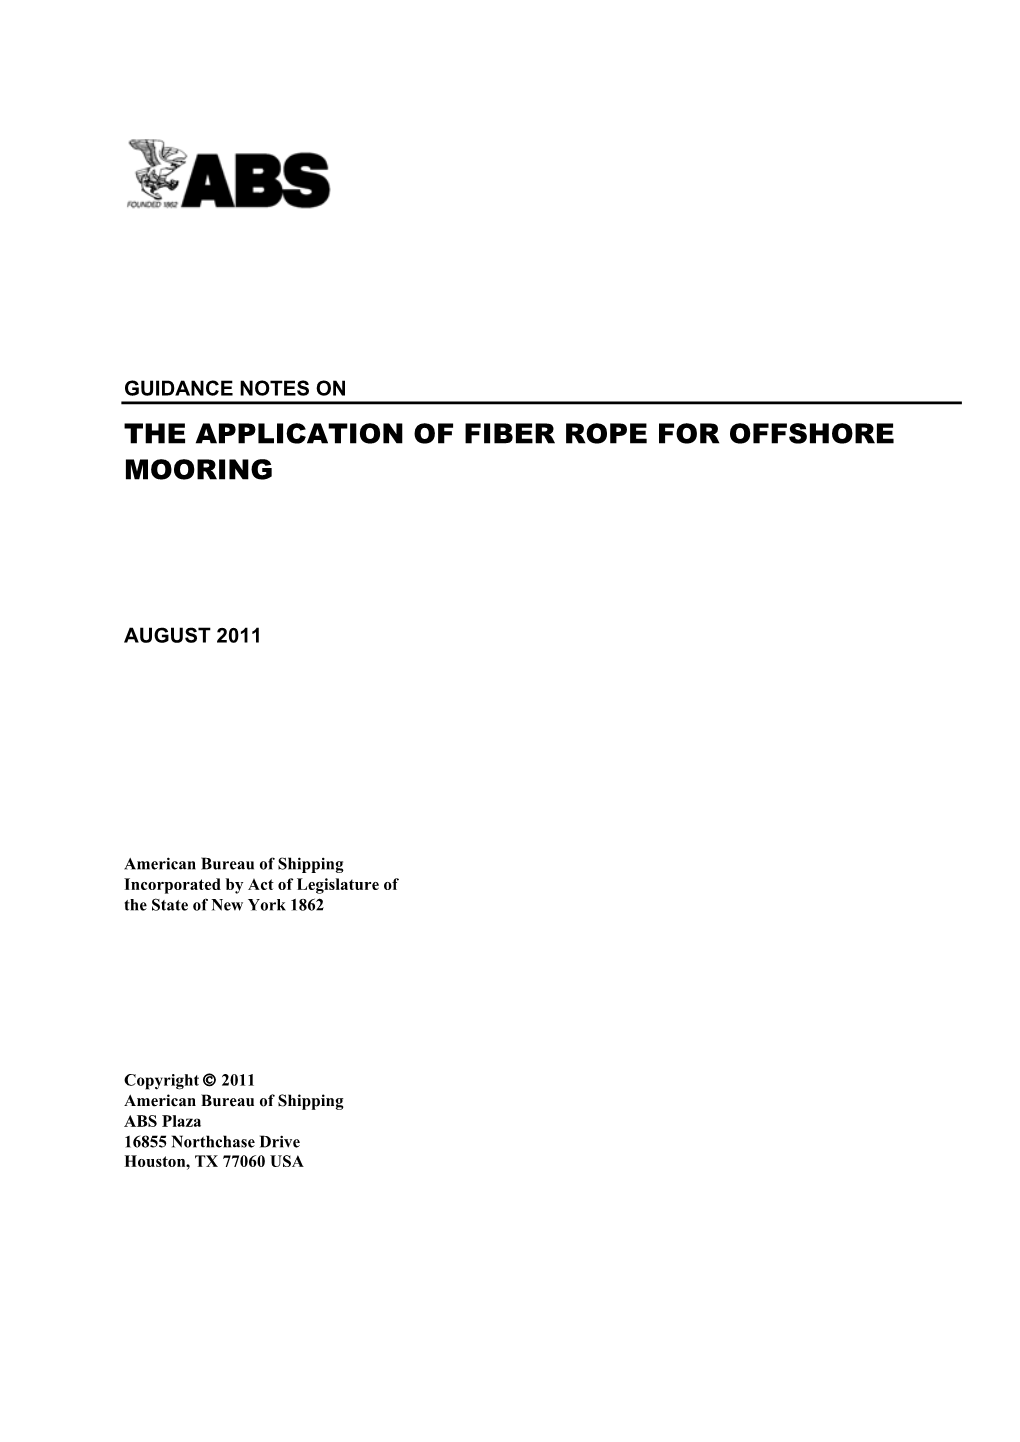 The Application of Fiber Rope for Offshore Mooring